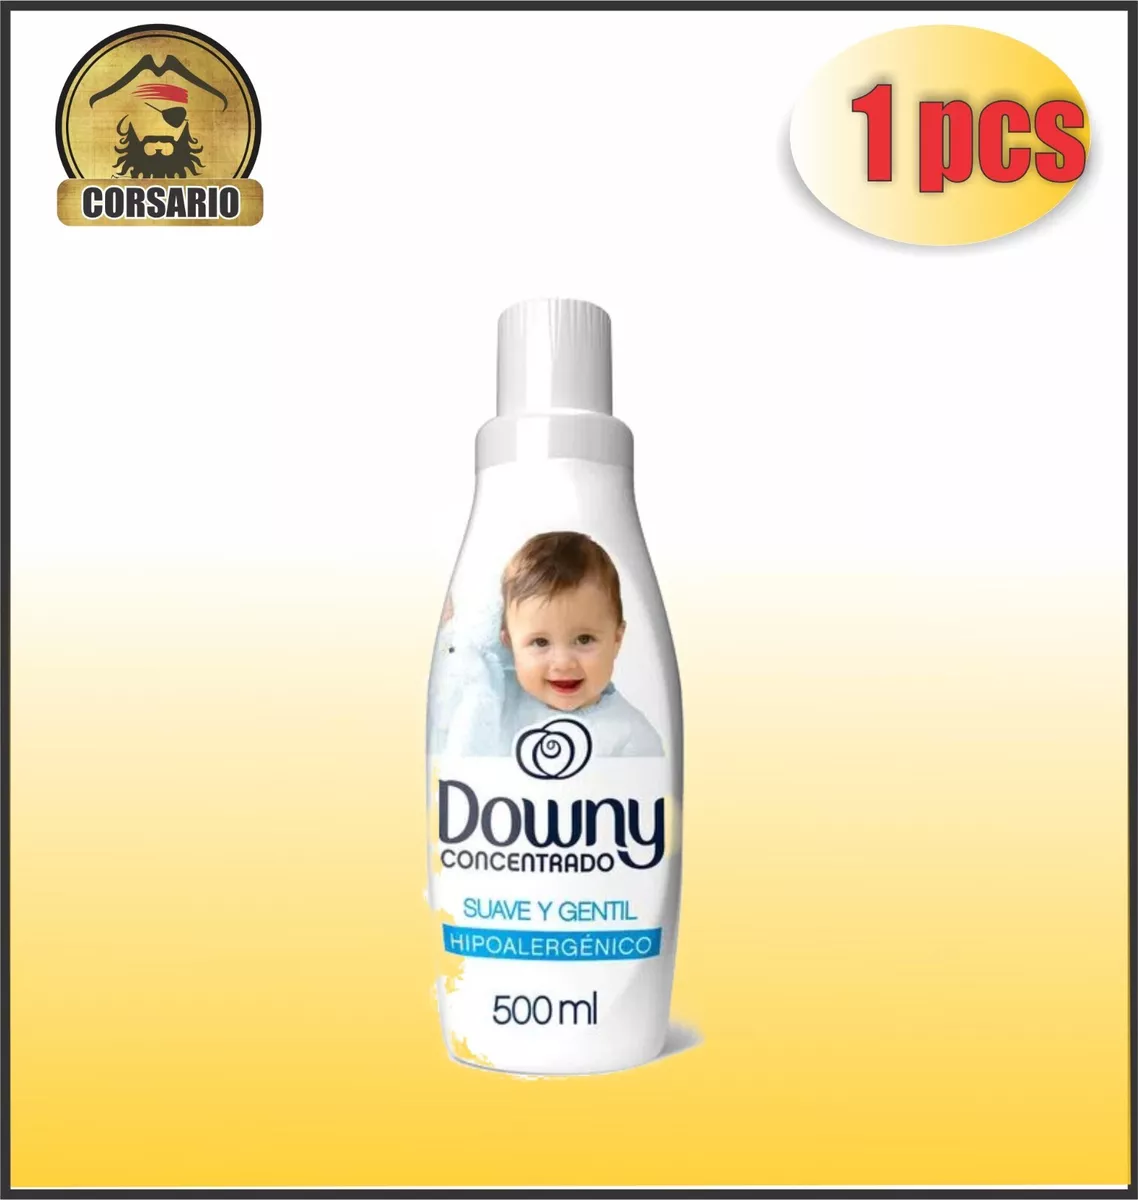 Downy Fabric Softener Hypoallergenic Concentrate for baby clothes x 500 ml